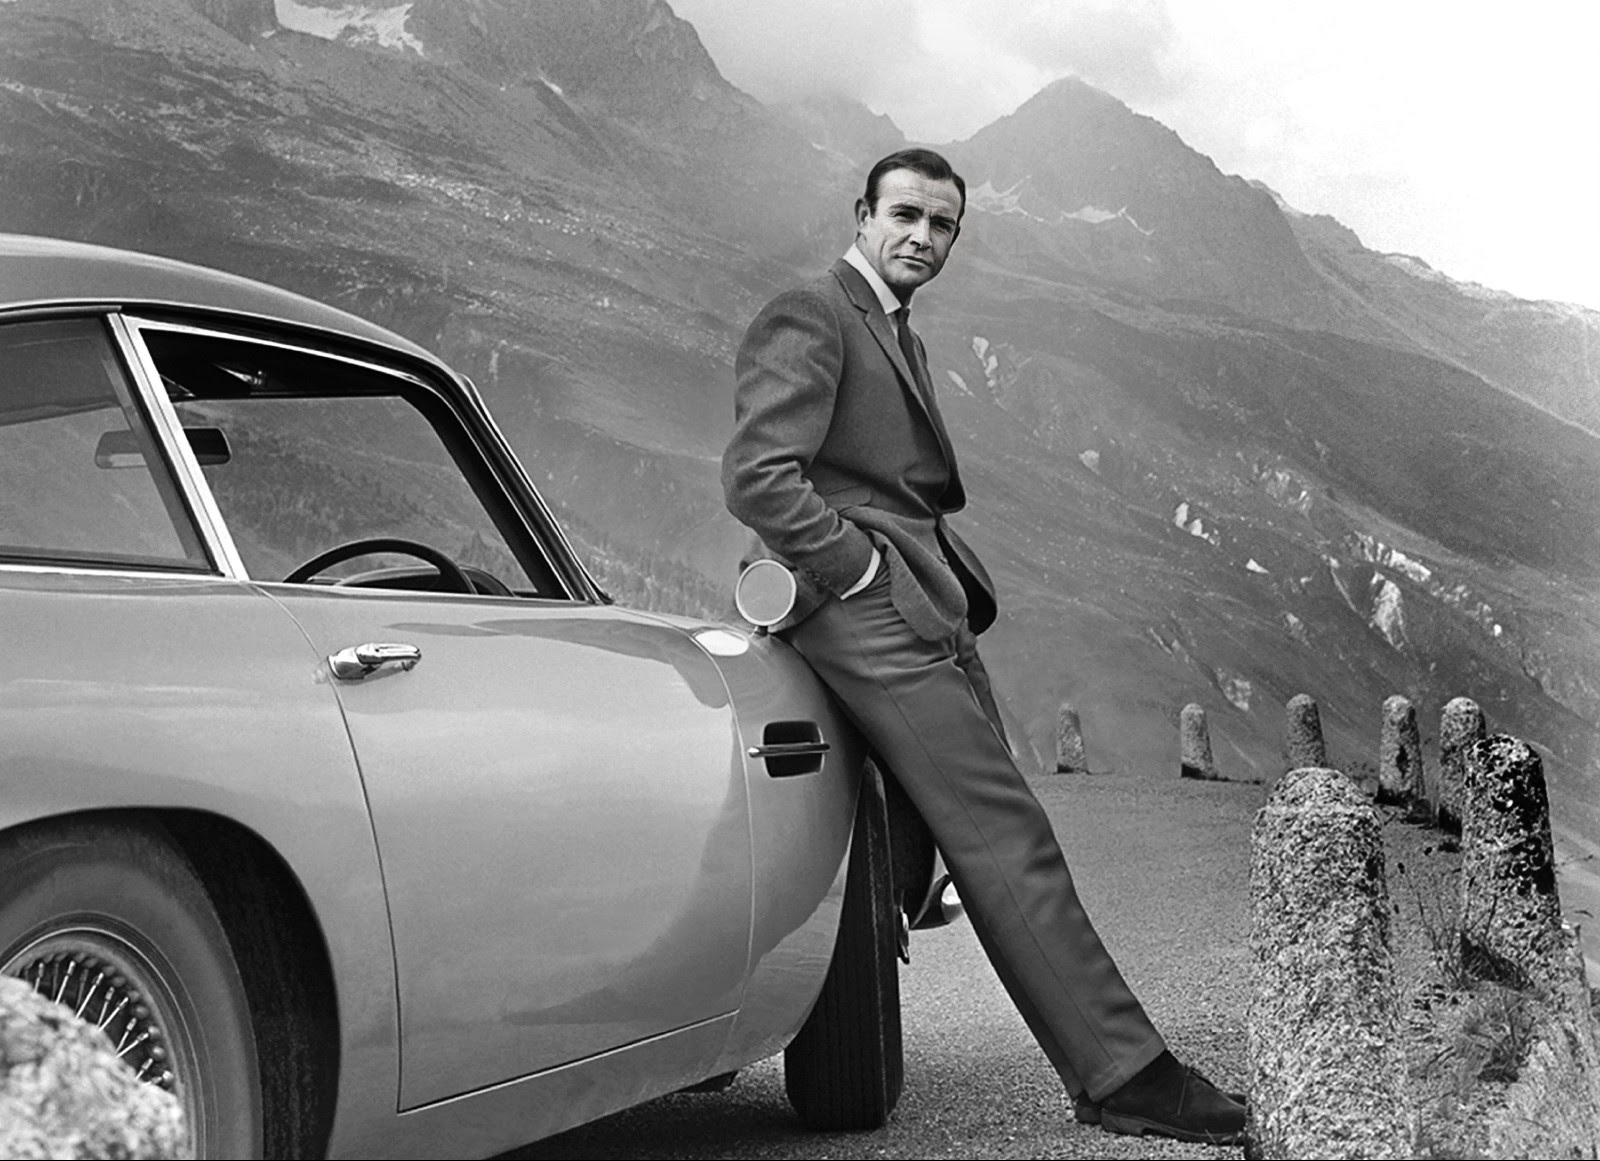 Sean Connery, starring as James Bond in Goldfinger, leans against his Aston Martin DB5 silver birch colored car